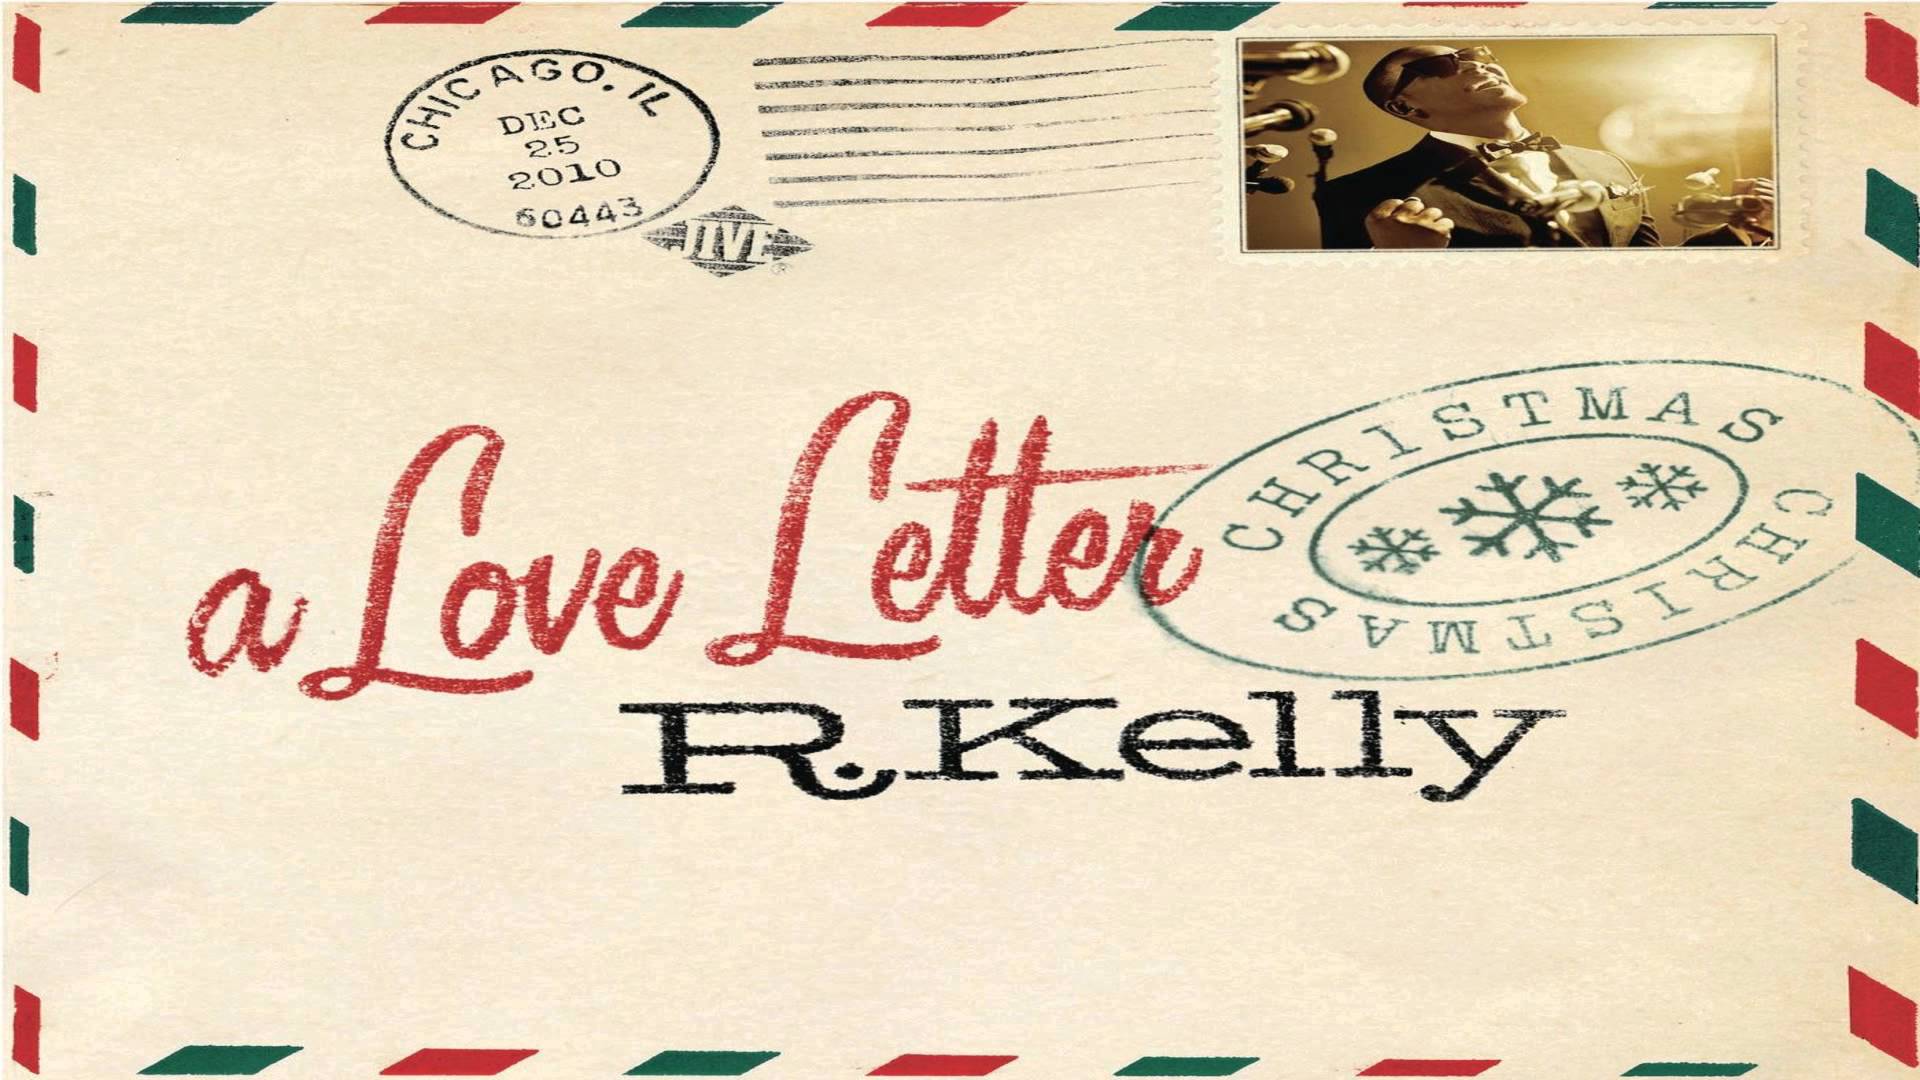 R. Kelly - A love letter Christmas